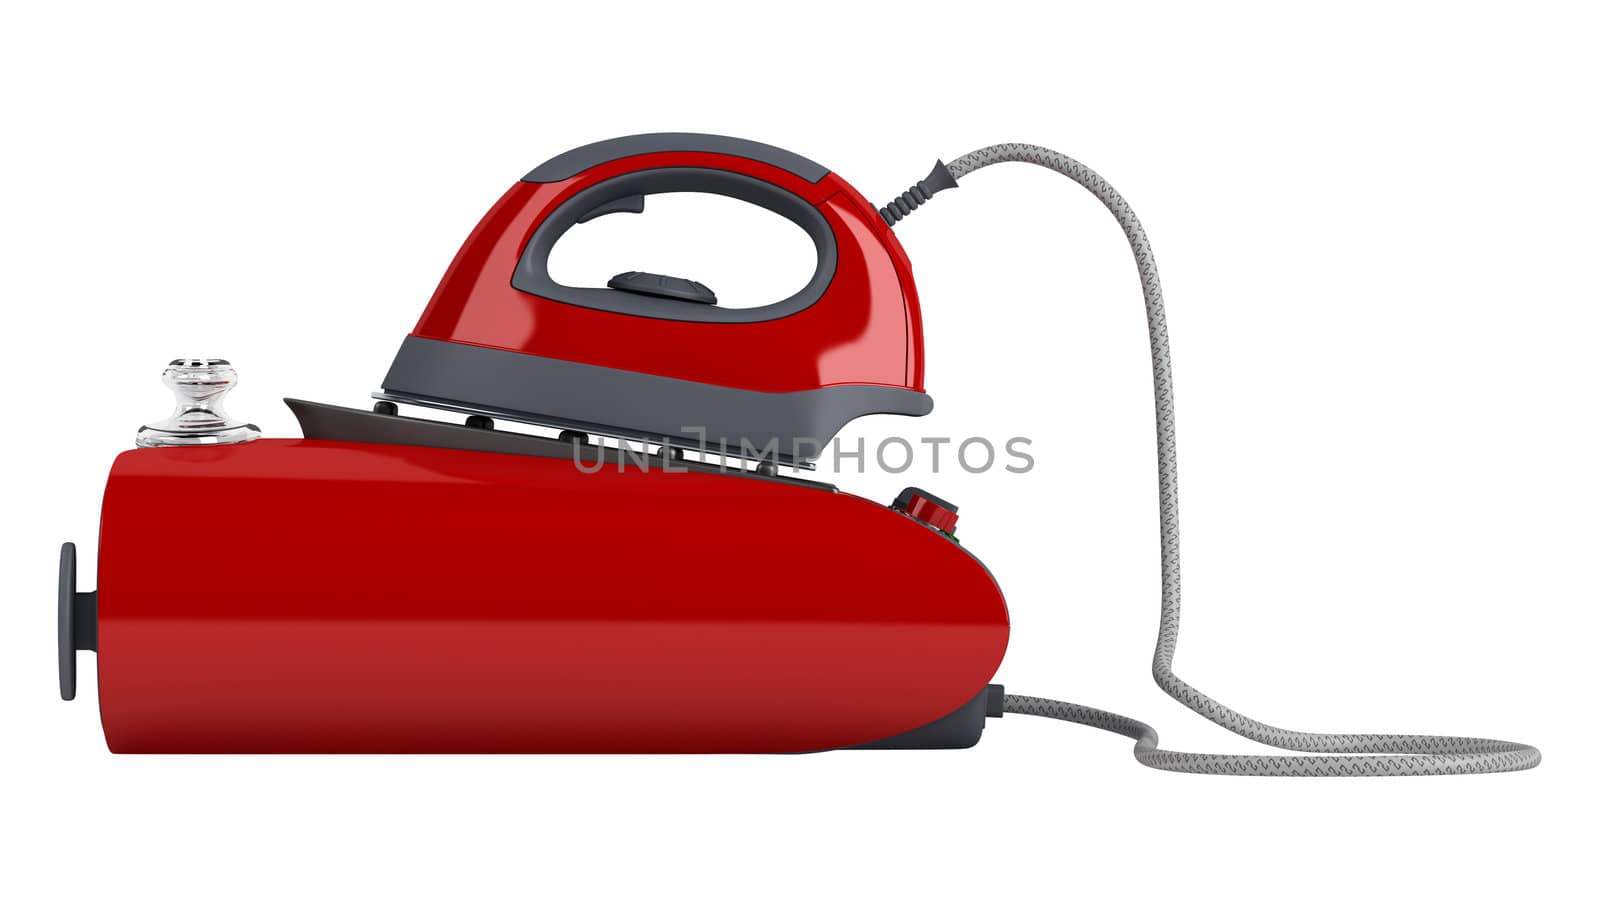 Professional central steam iron isolated on white background